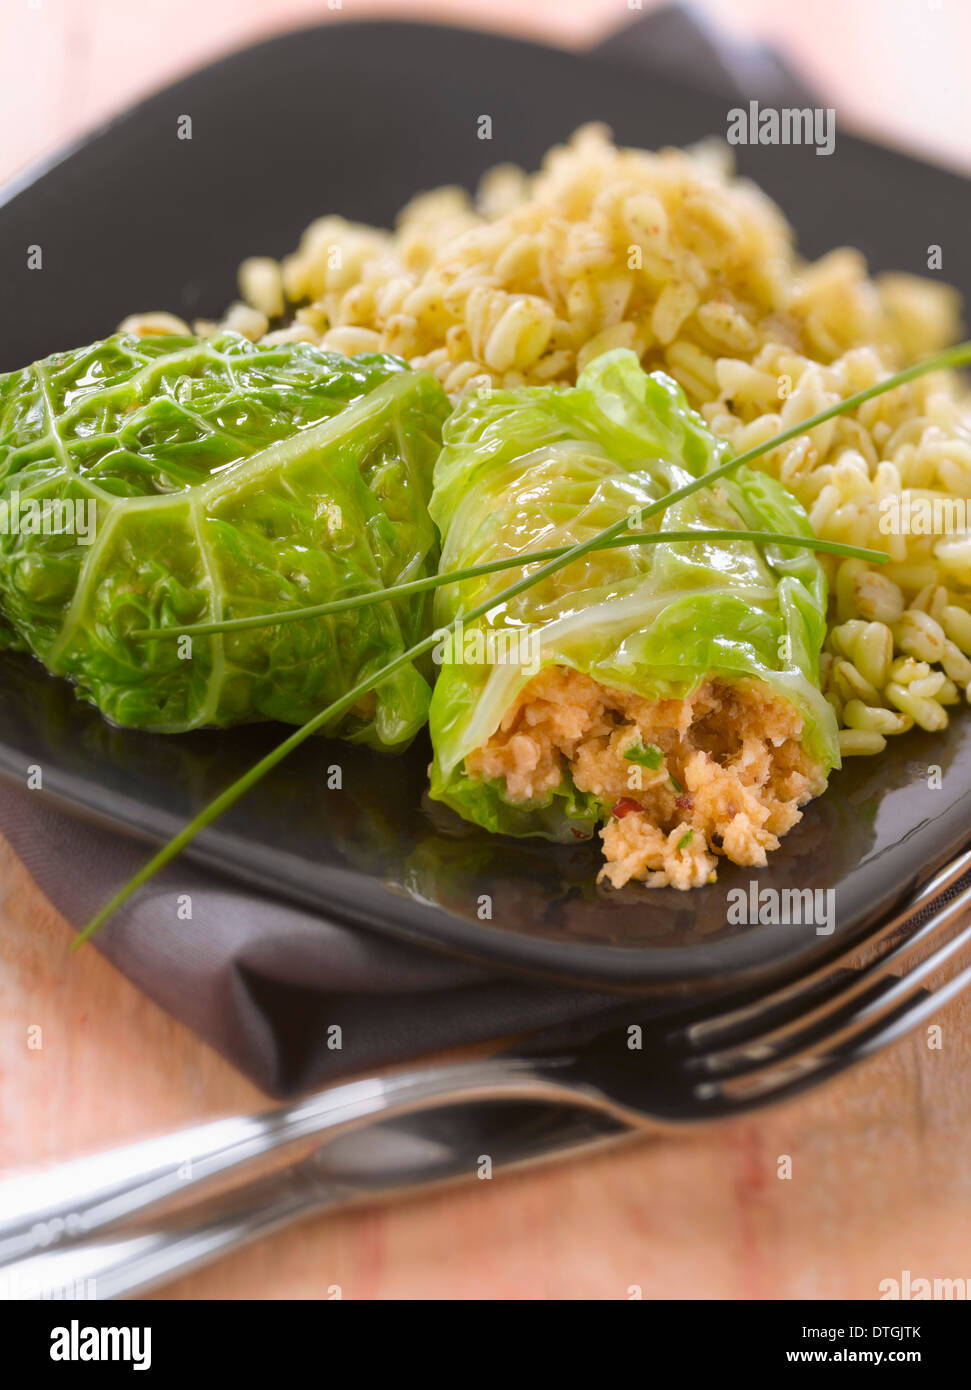 Cabbage leaves stuffed with salmon and buckwheat Stock Photo